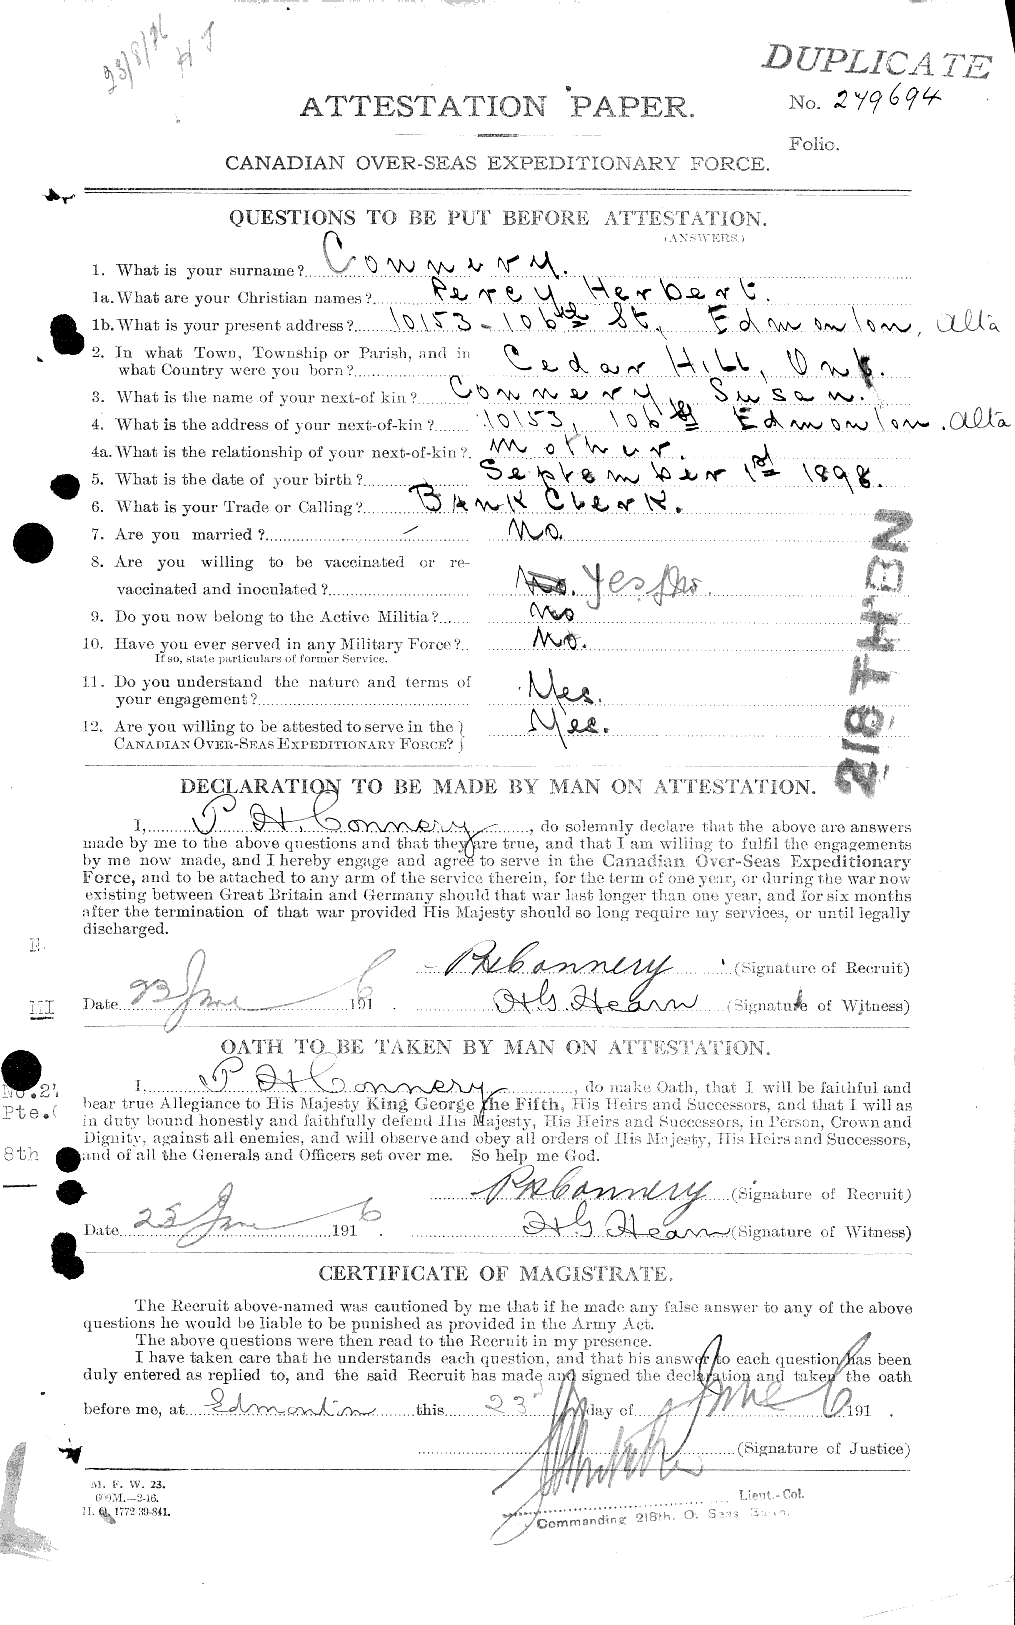 Personnel Records of the First World War - CEF 031289a